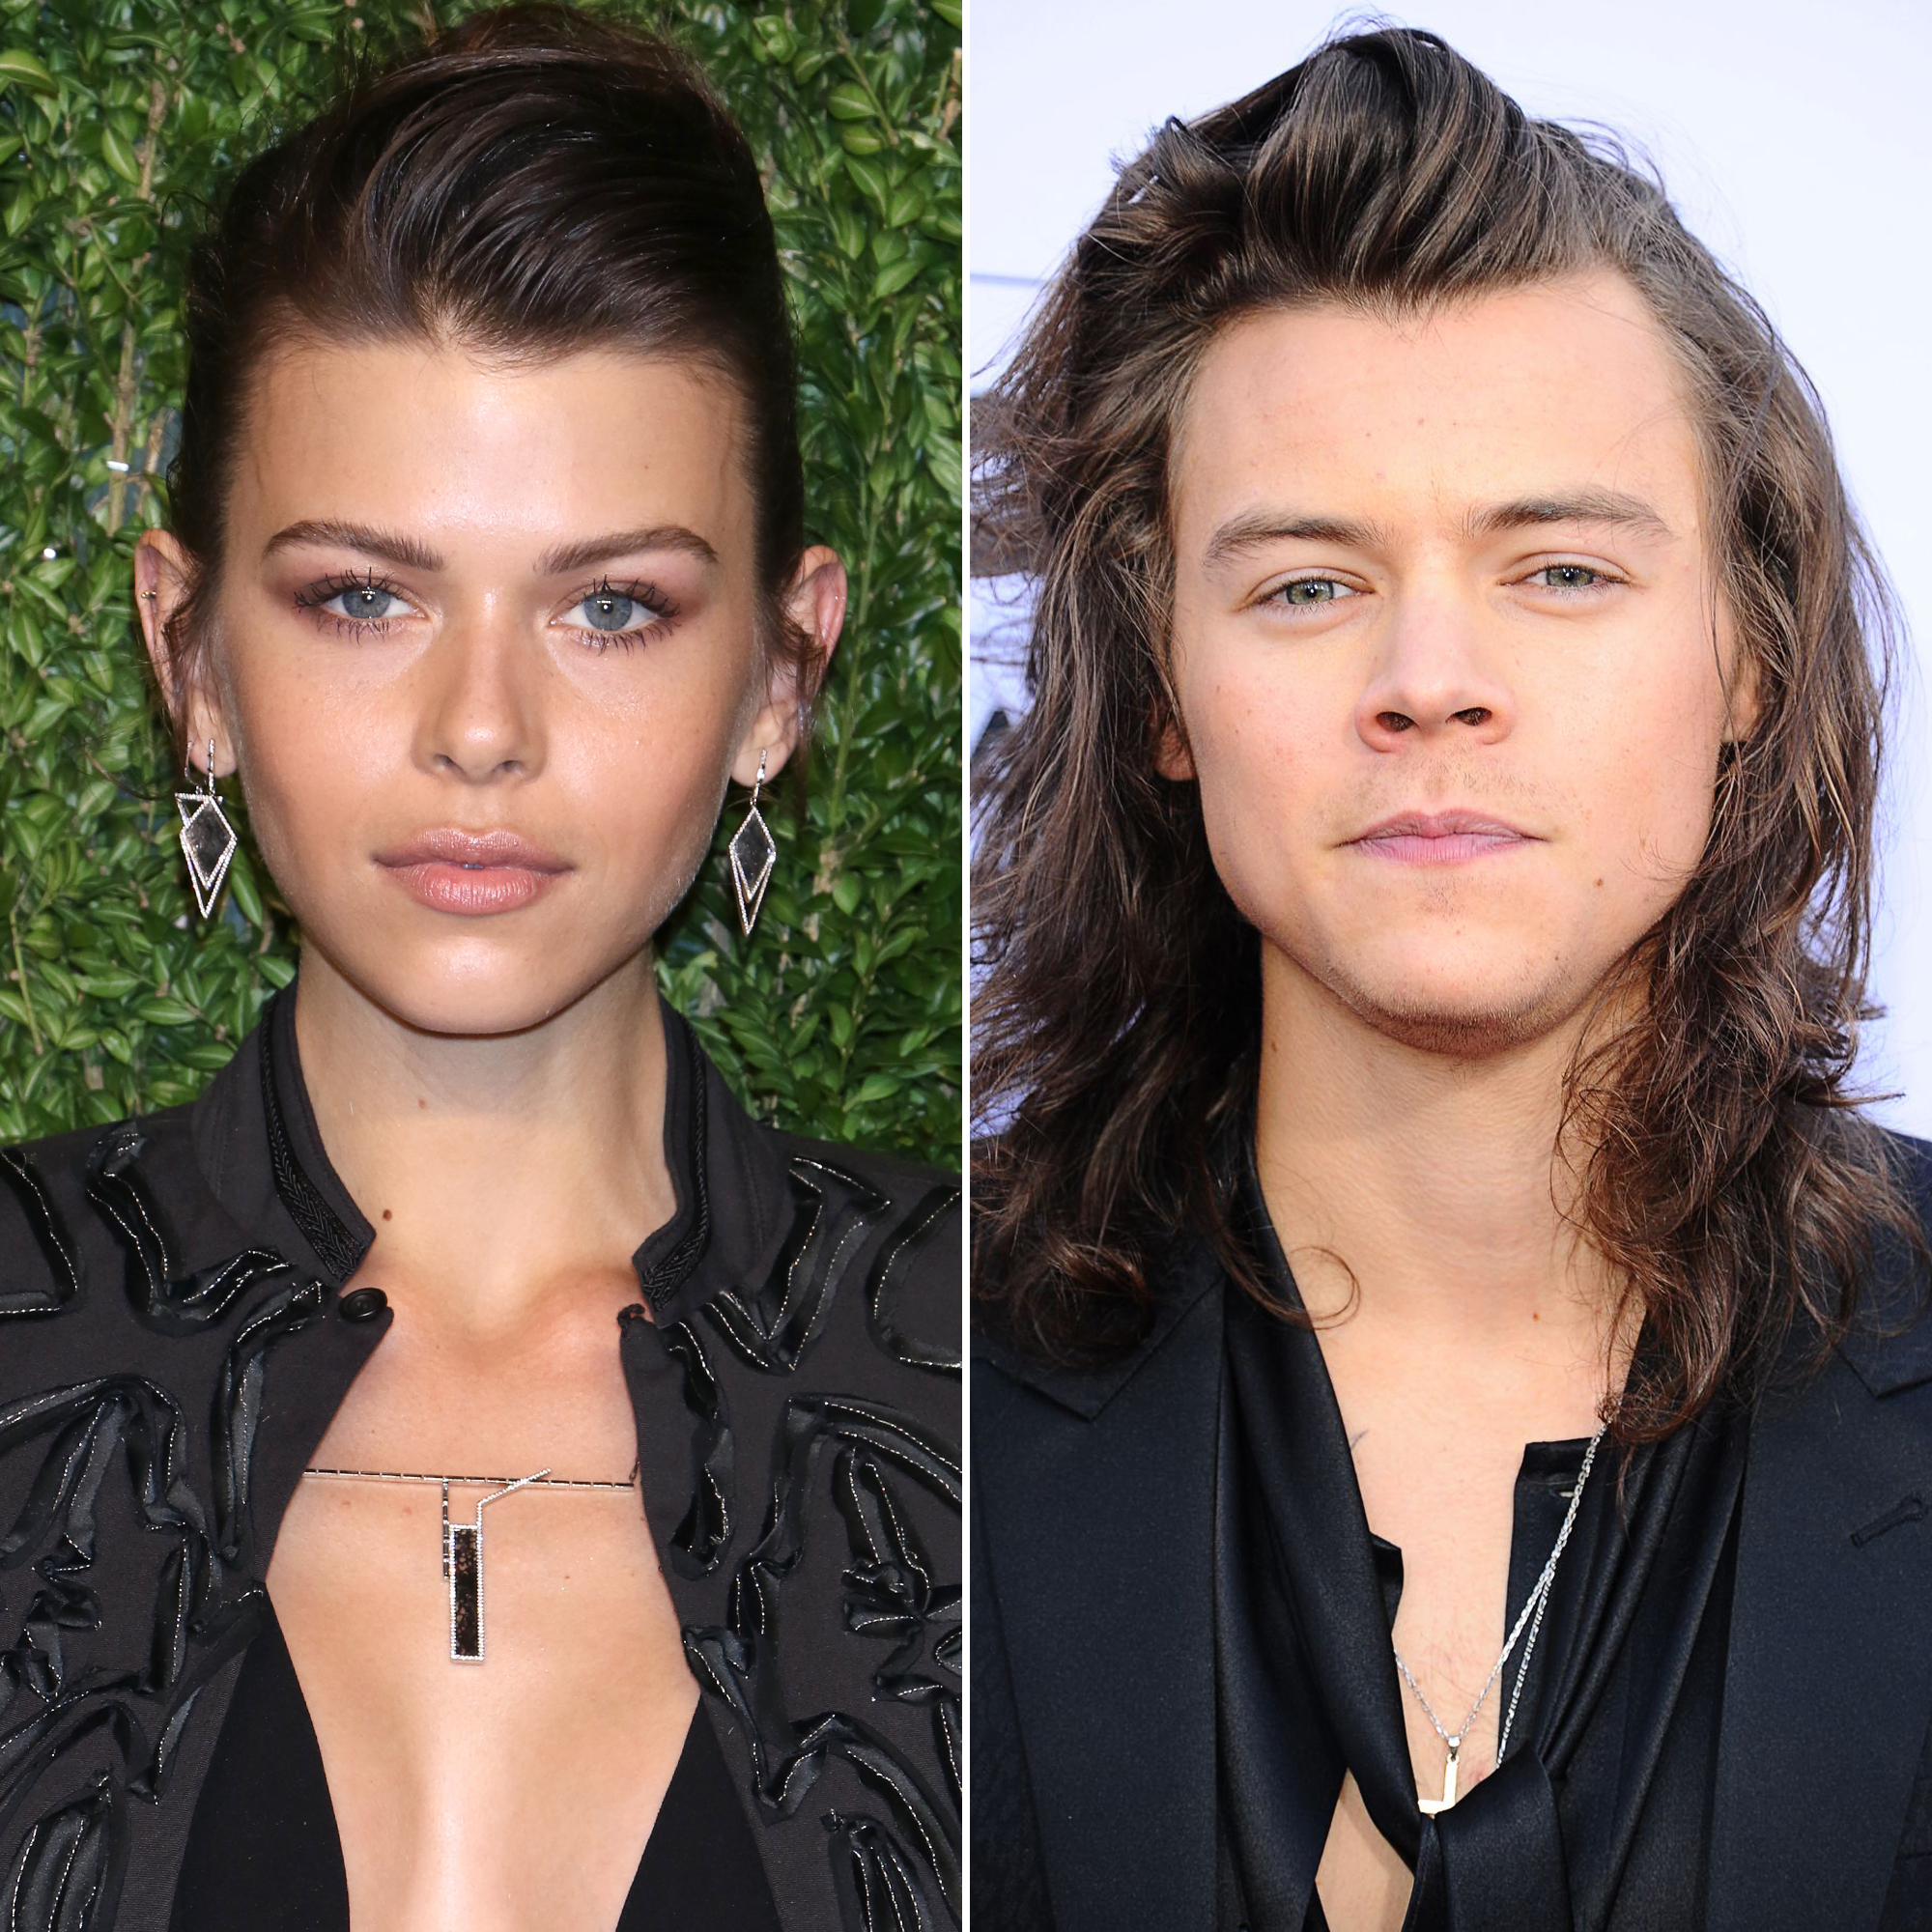 Harry Styles’ Dating History Taylor Swift, Kendall Jenner, More